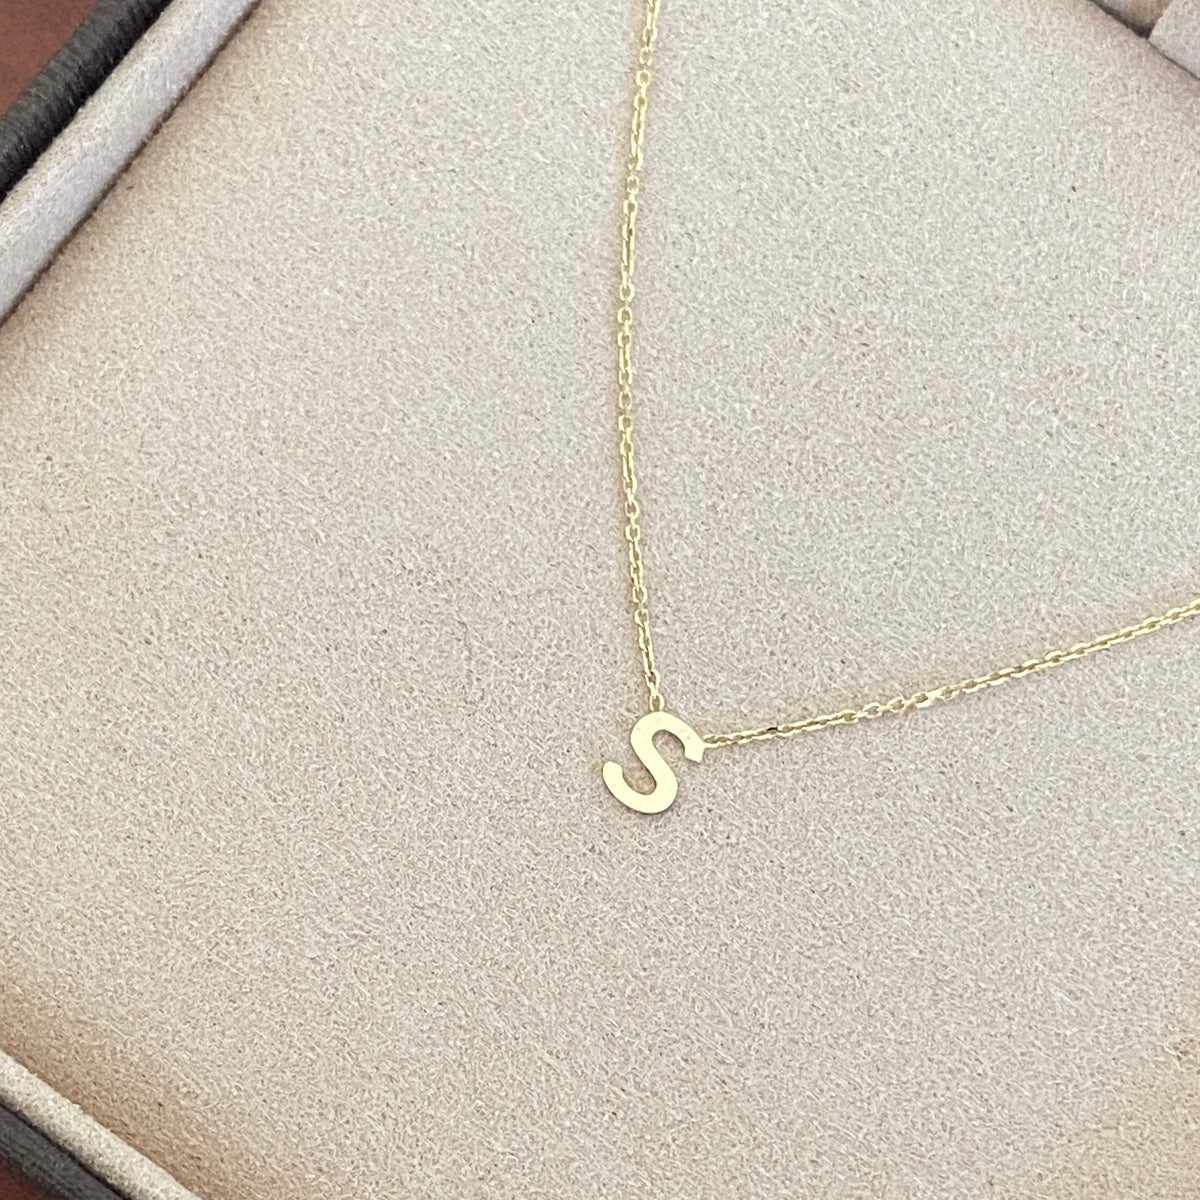 PETITE 'S' INITIAL NECKLACE | 9K SOLID GOLD